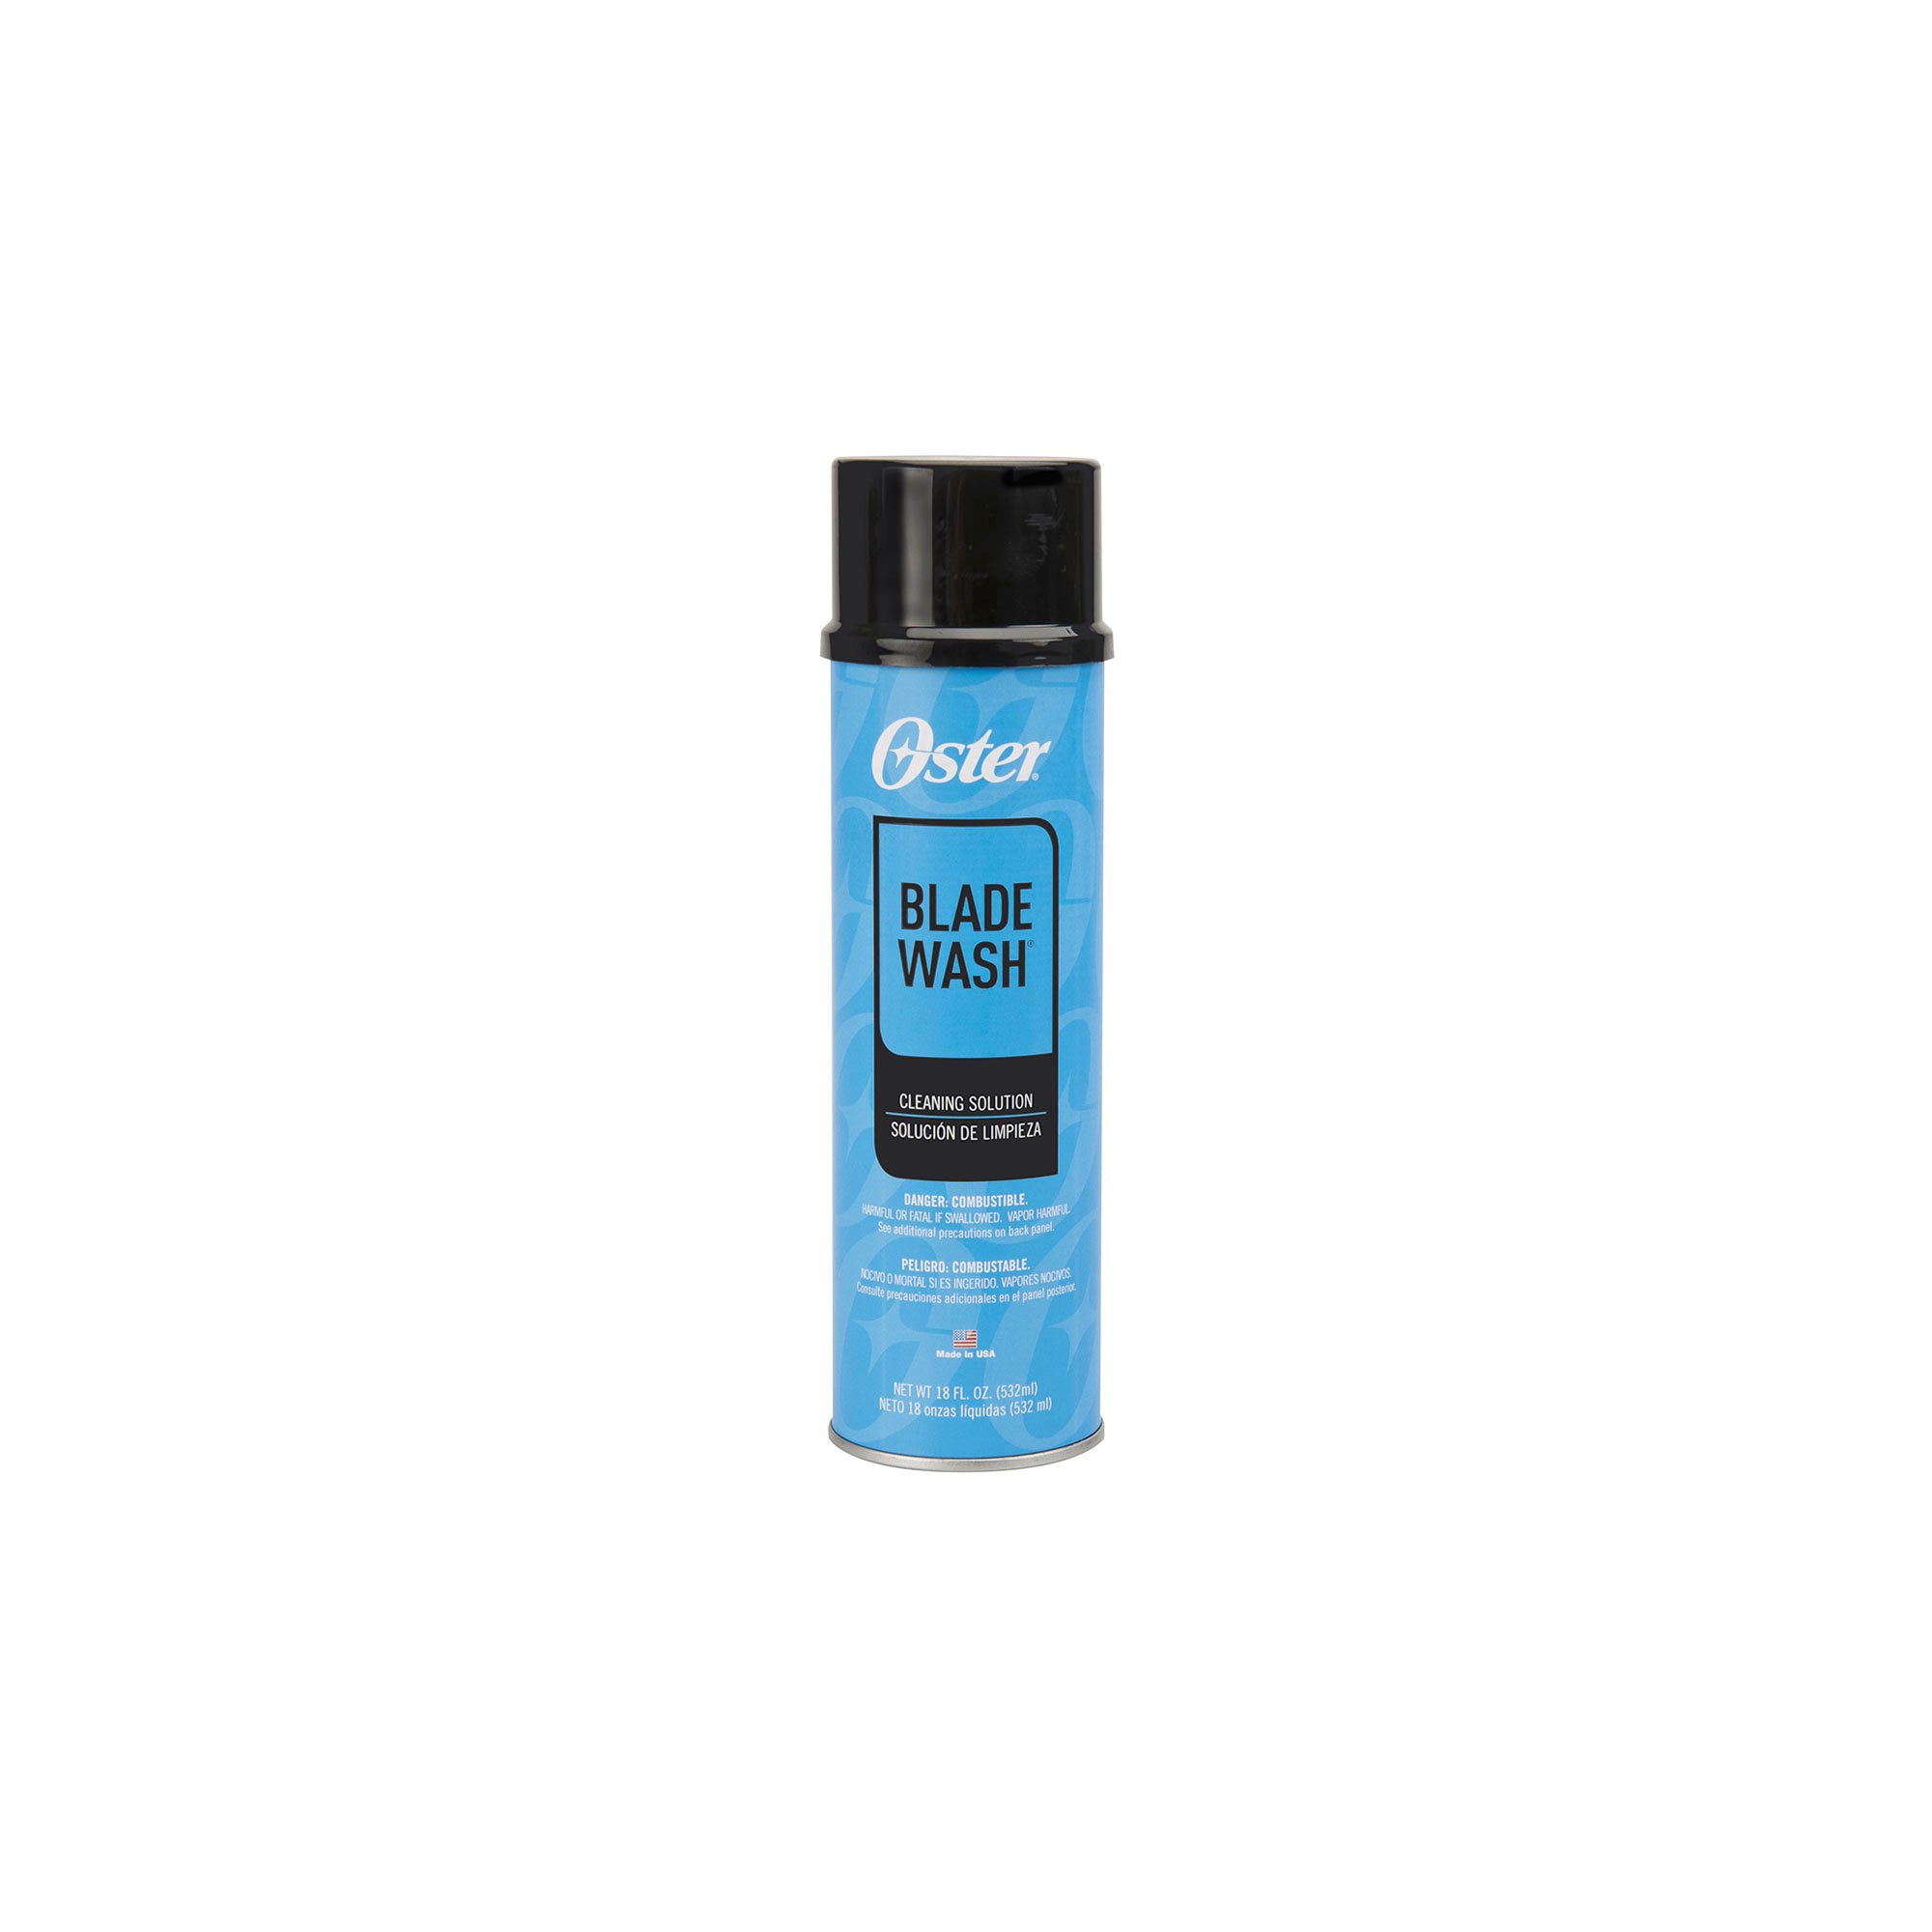 Oster Blade Wash Cleaning Solution 18 oz. For All Brands Blades 